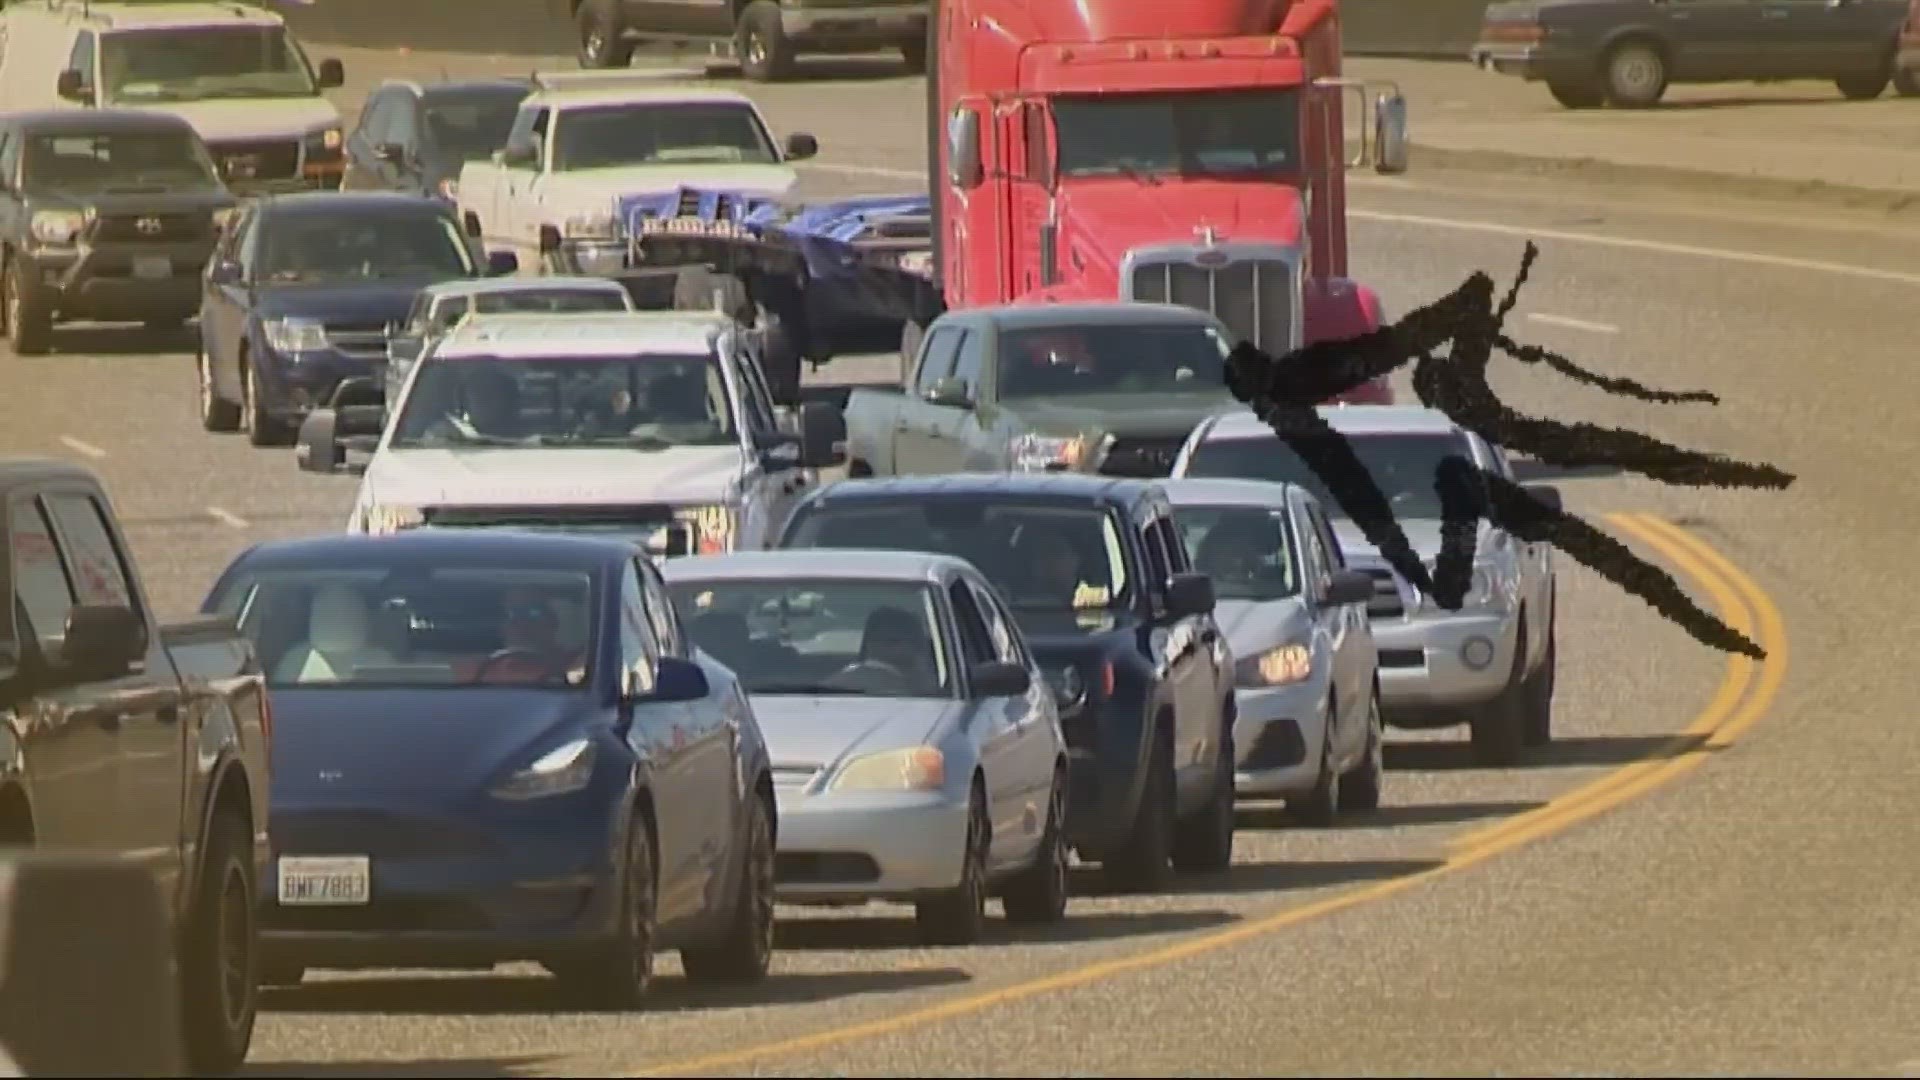 On the latest installment of "Driving Me Crazy," KGW's Chris McGinness revisits one of Portland's worst intersections: the Marine Drive interchange.